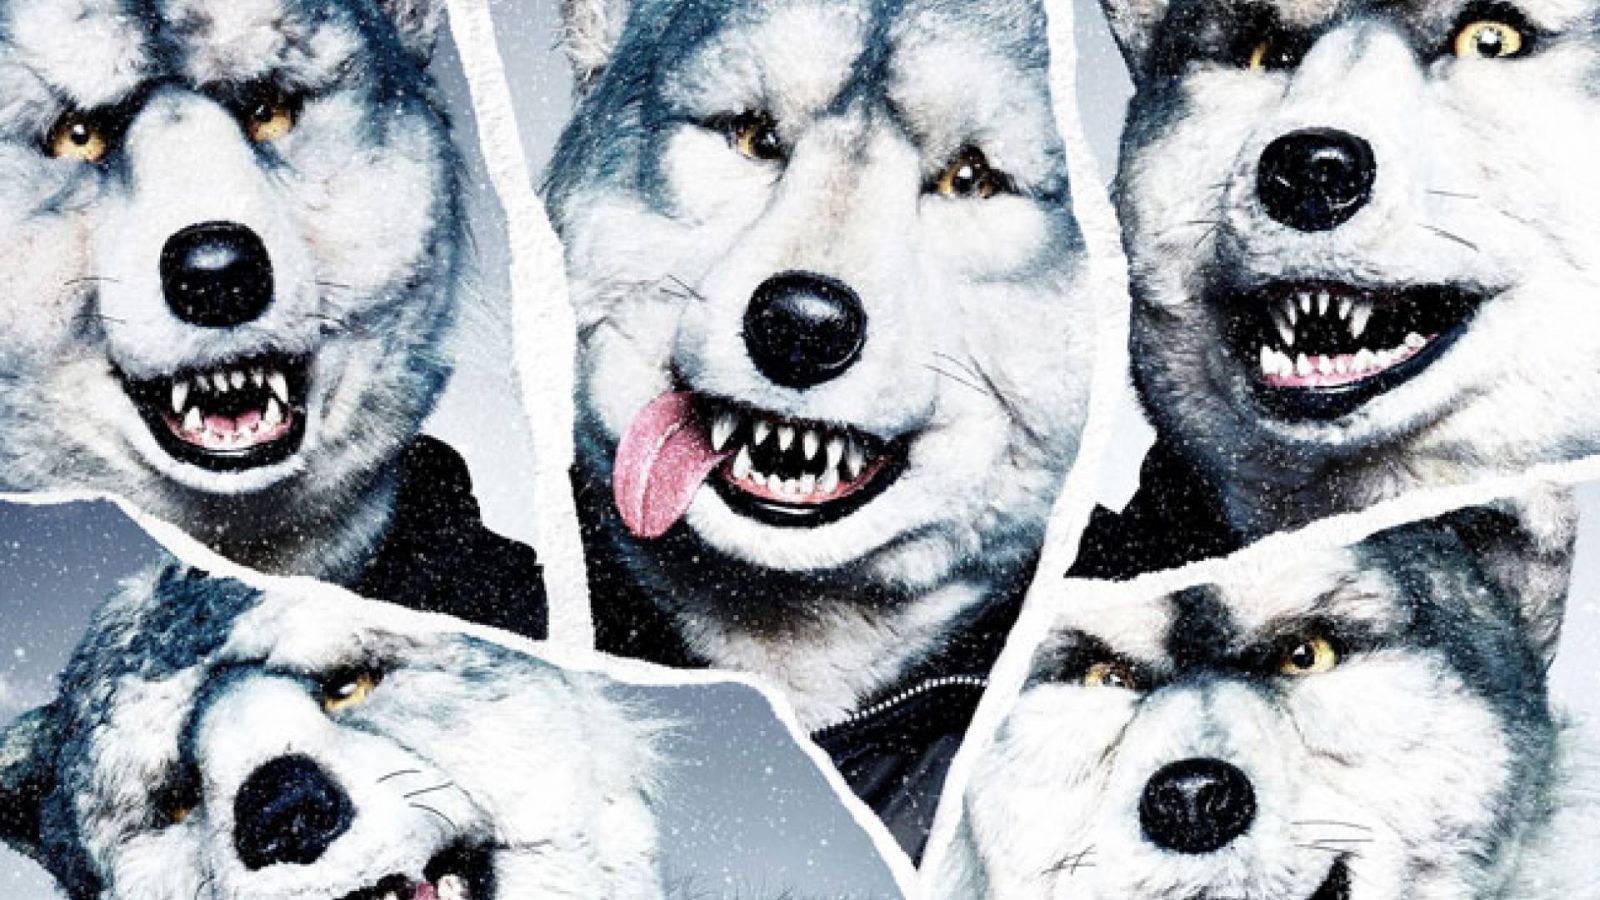 MAN WITH A MISSION anuncia nuevas fechas de su gira europea © MAN WITH A MISSION. All rights reserved.